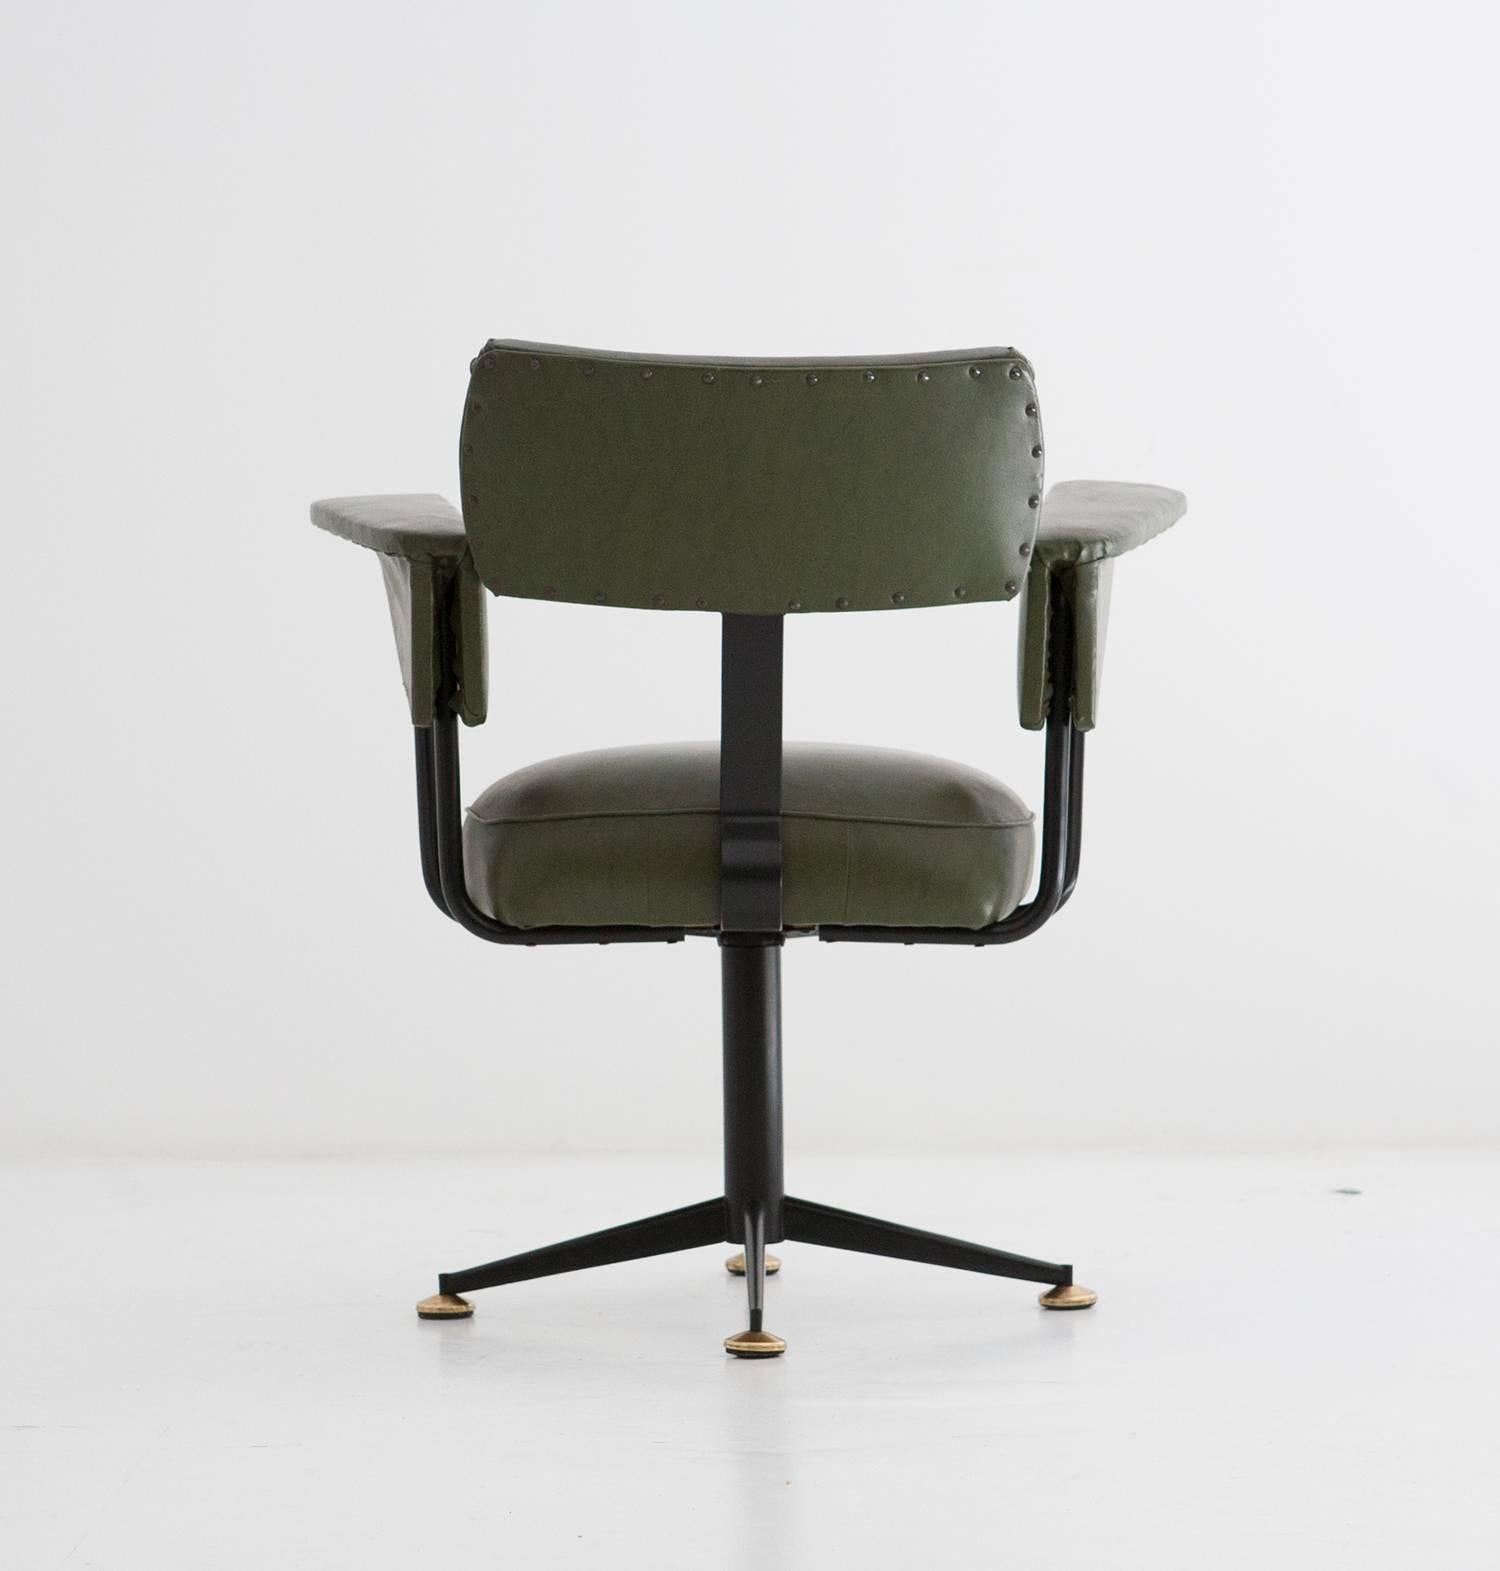 Faux Leather Italian Mid-Century Swivel chair, Iron, Wood and Brass Frame, 1950s